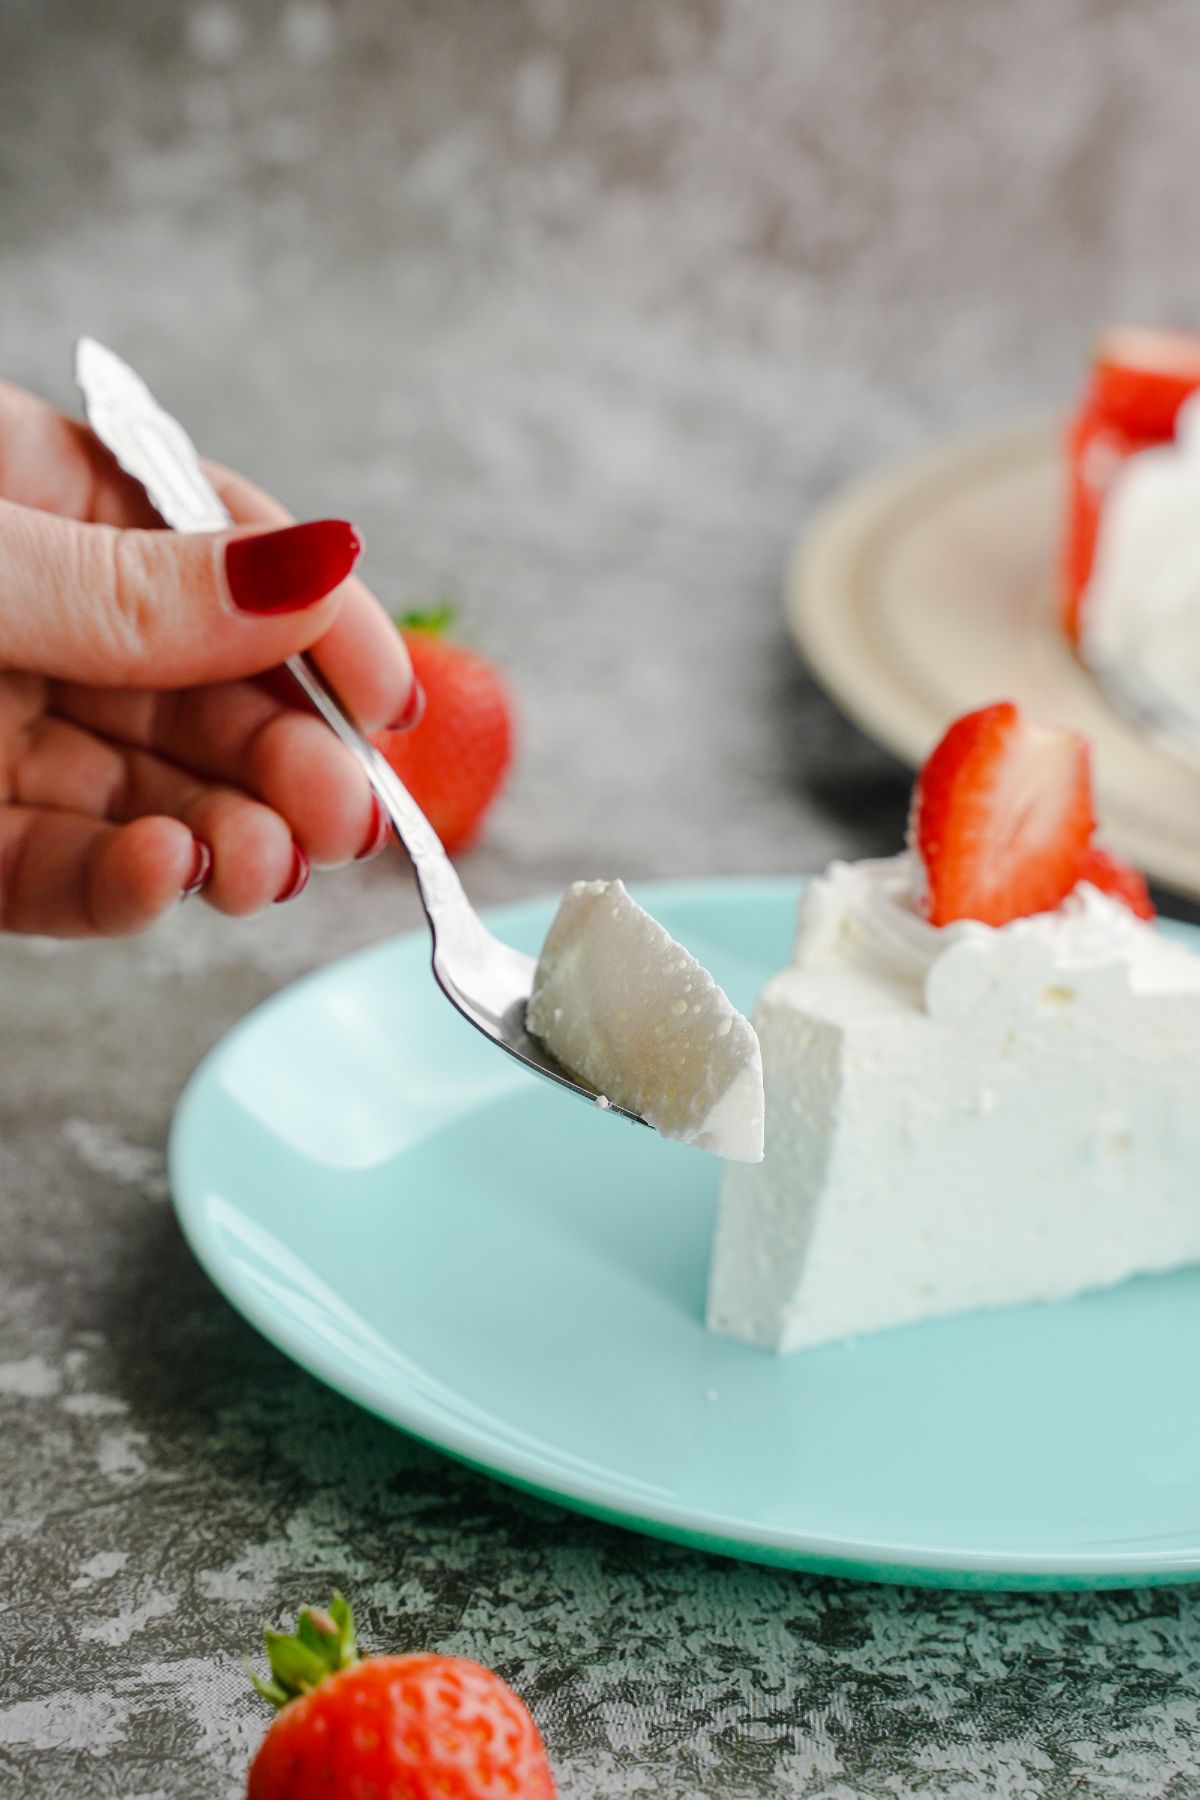 A bite of No-Bake Pavlova With Strawberries in spoon